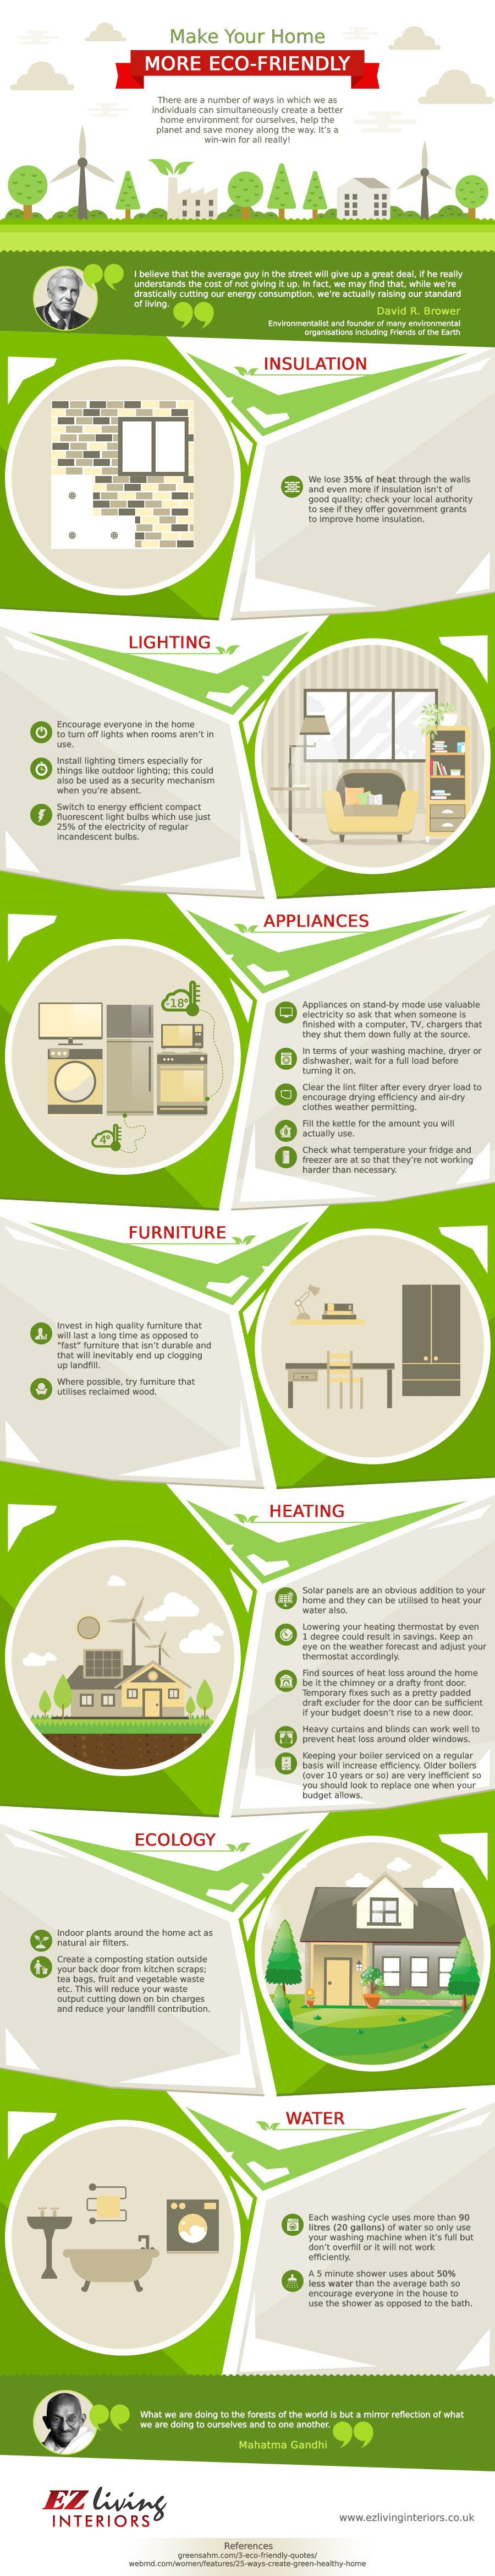 Eco-Friendly Ideas for a Homeowner [Infographic] | ecogreenlove